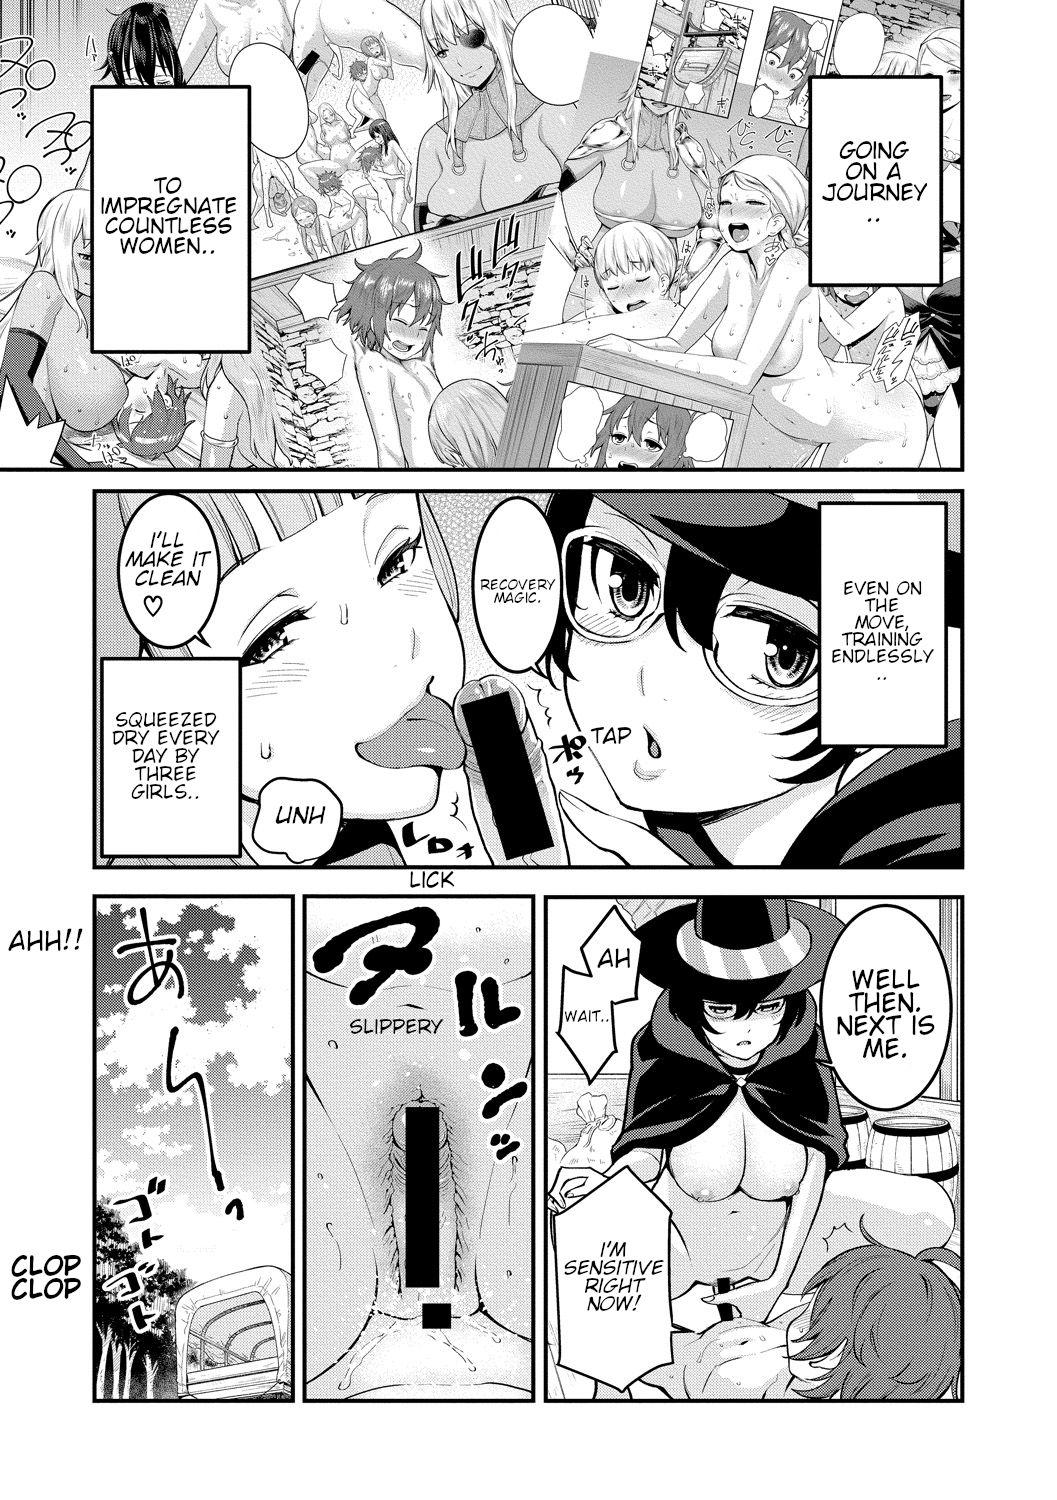 Analfucking Chintore Quest II: Shota Yuusha Elf no Sato de Dai Rankou | Chintore Quest II: Shota Hero and the Great Elf Village Orgy Perfect Tits - Page 3